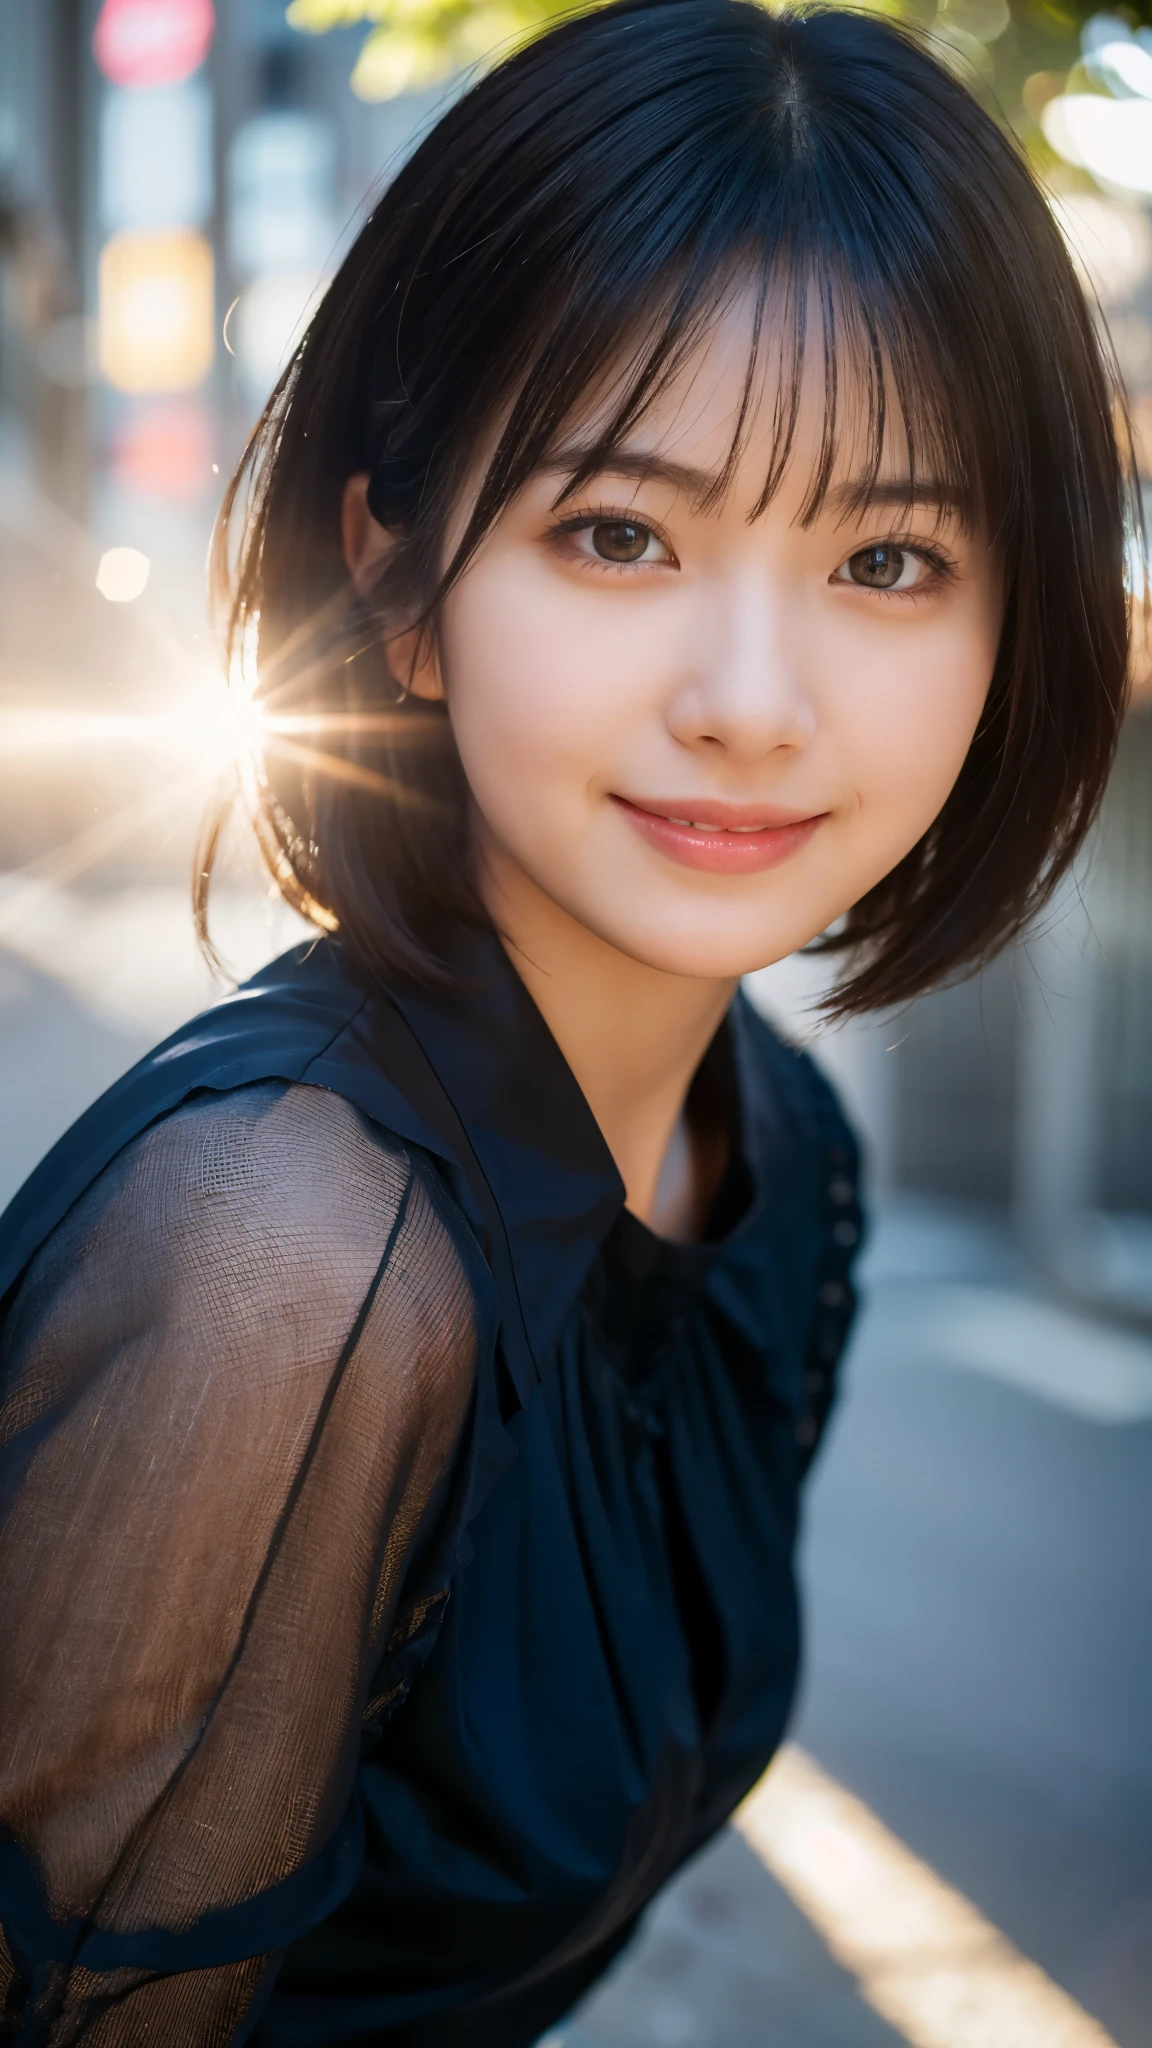 (highest quality,masterpiece:1.3,ultra high resolution),(Super detailed,caustics,8k),(photorealistic:1.4,RAW shooting),1 girl,(look at the camera with a smile),20-year-old,cute,Japanese,black hair short cut,long sleeve blouse,big ,bust up shot,street,face focus,Natural light,Backlight,(A bright light shines from above),(Lens flare),professional writing,(low position),(Low - Angle)